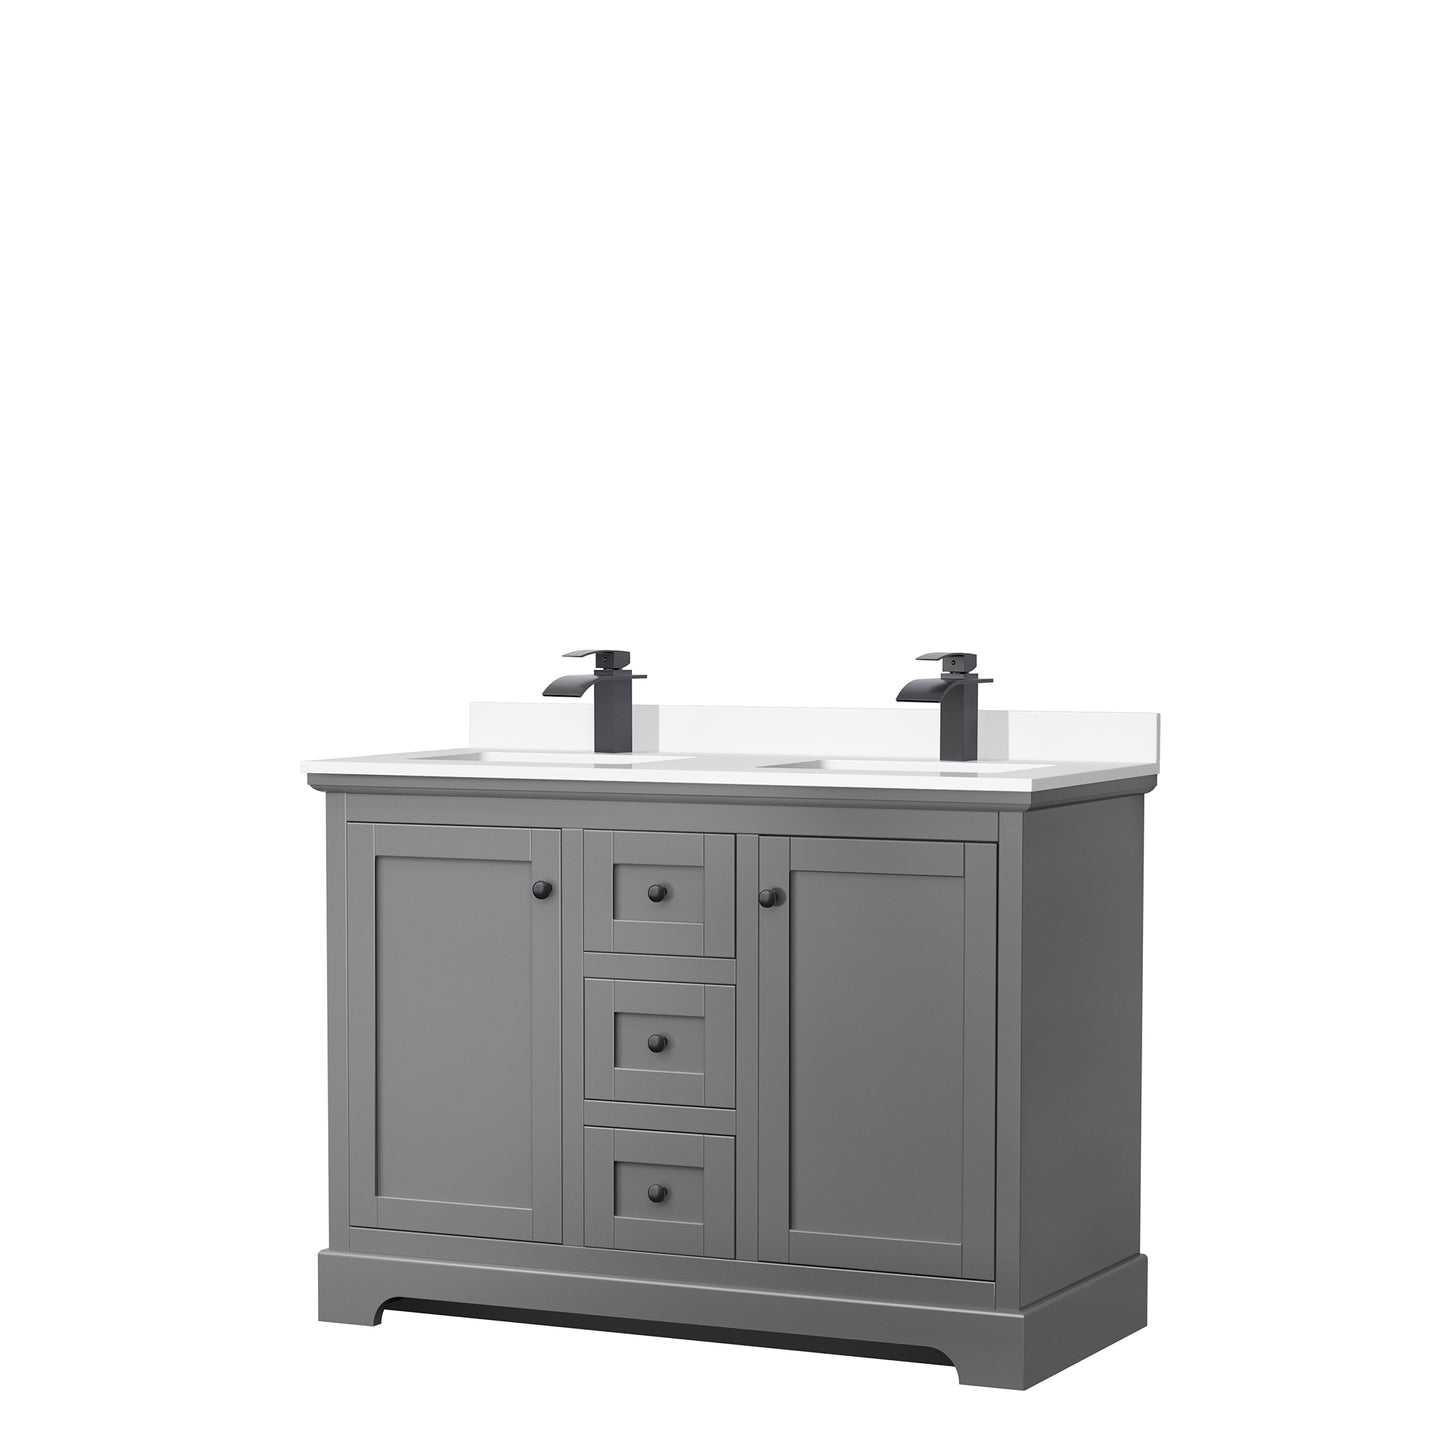 Wyndham Avery 48 Inch Double Bathroom Vanity White Cultured Marble Countertop with Undermount Square Sinks in Matte Black Trim - Luxe Bathroom Vanities